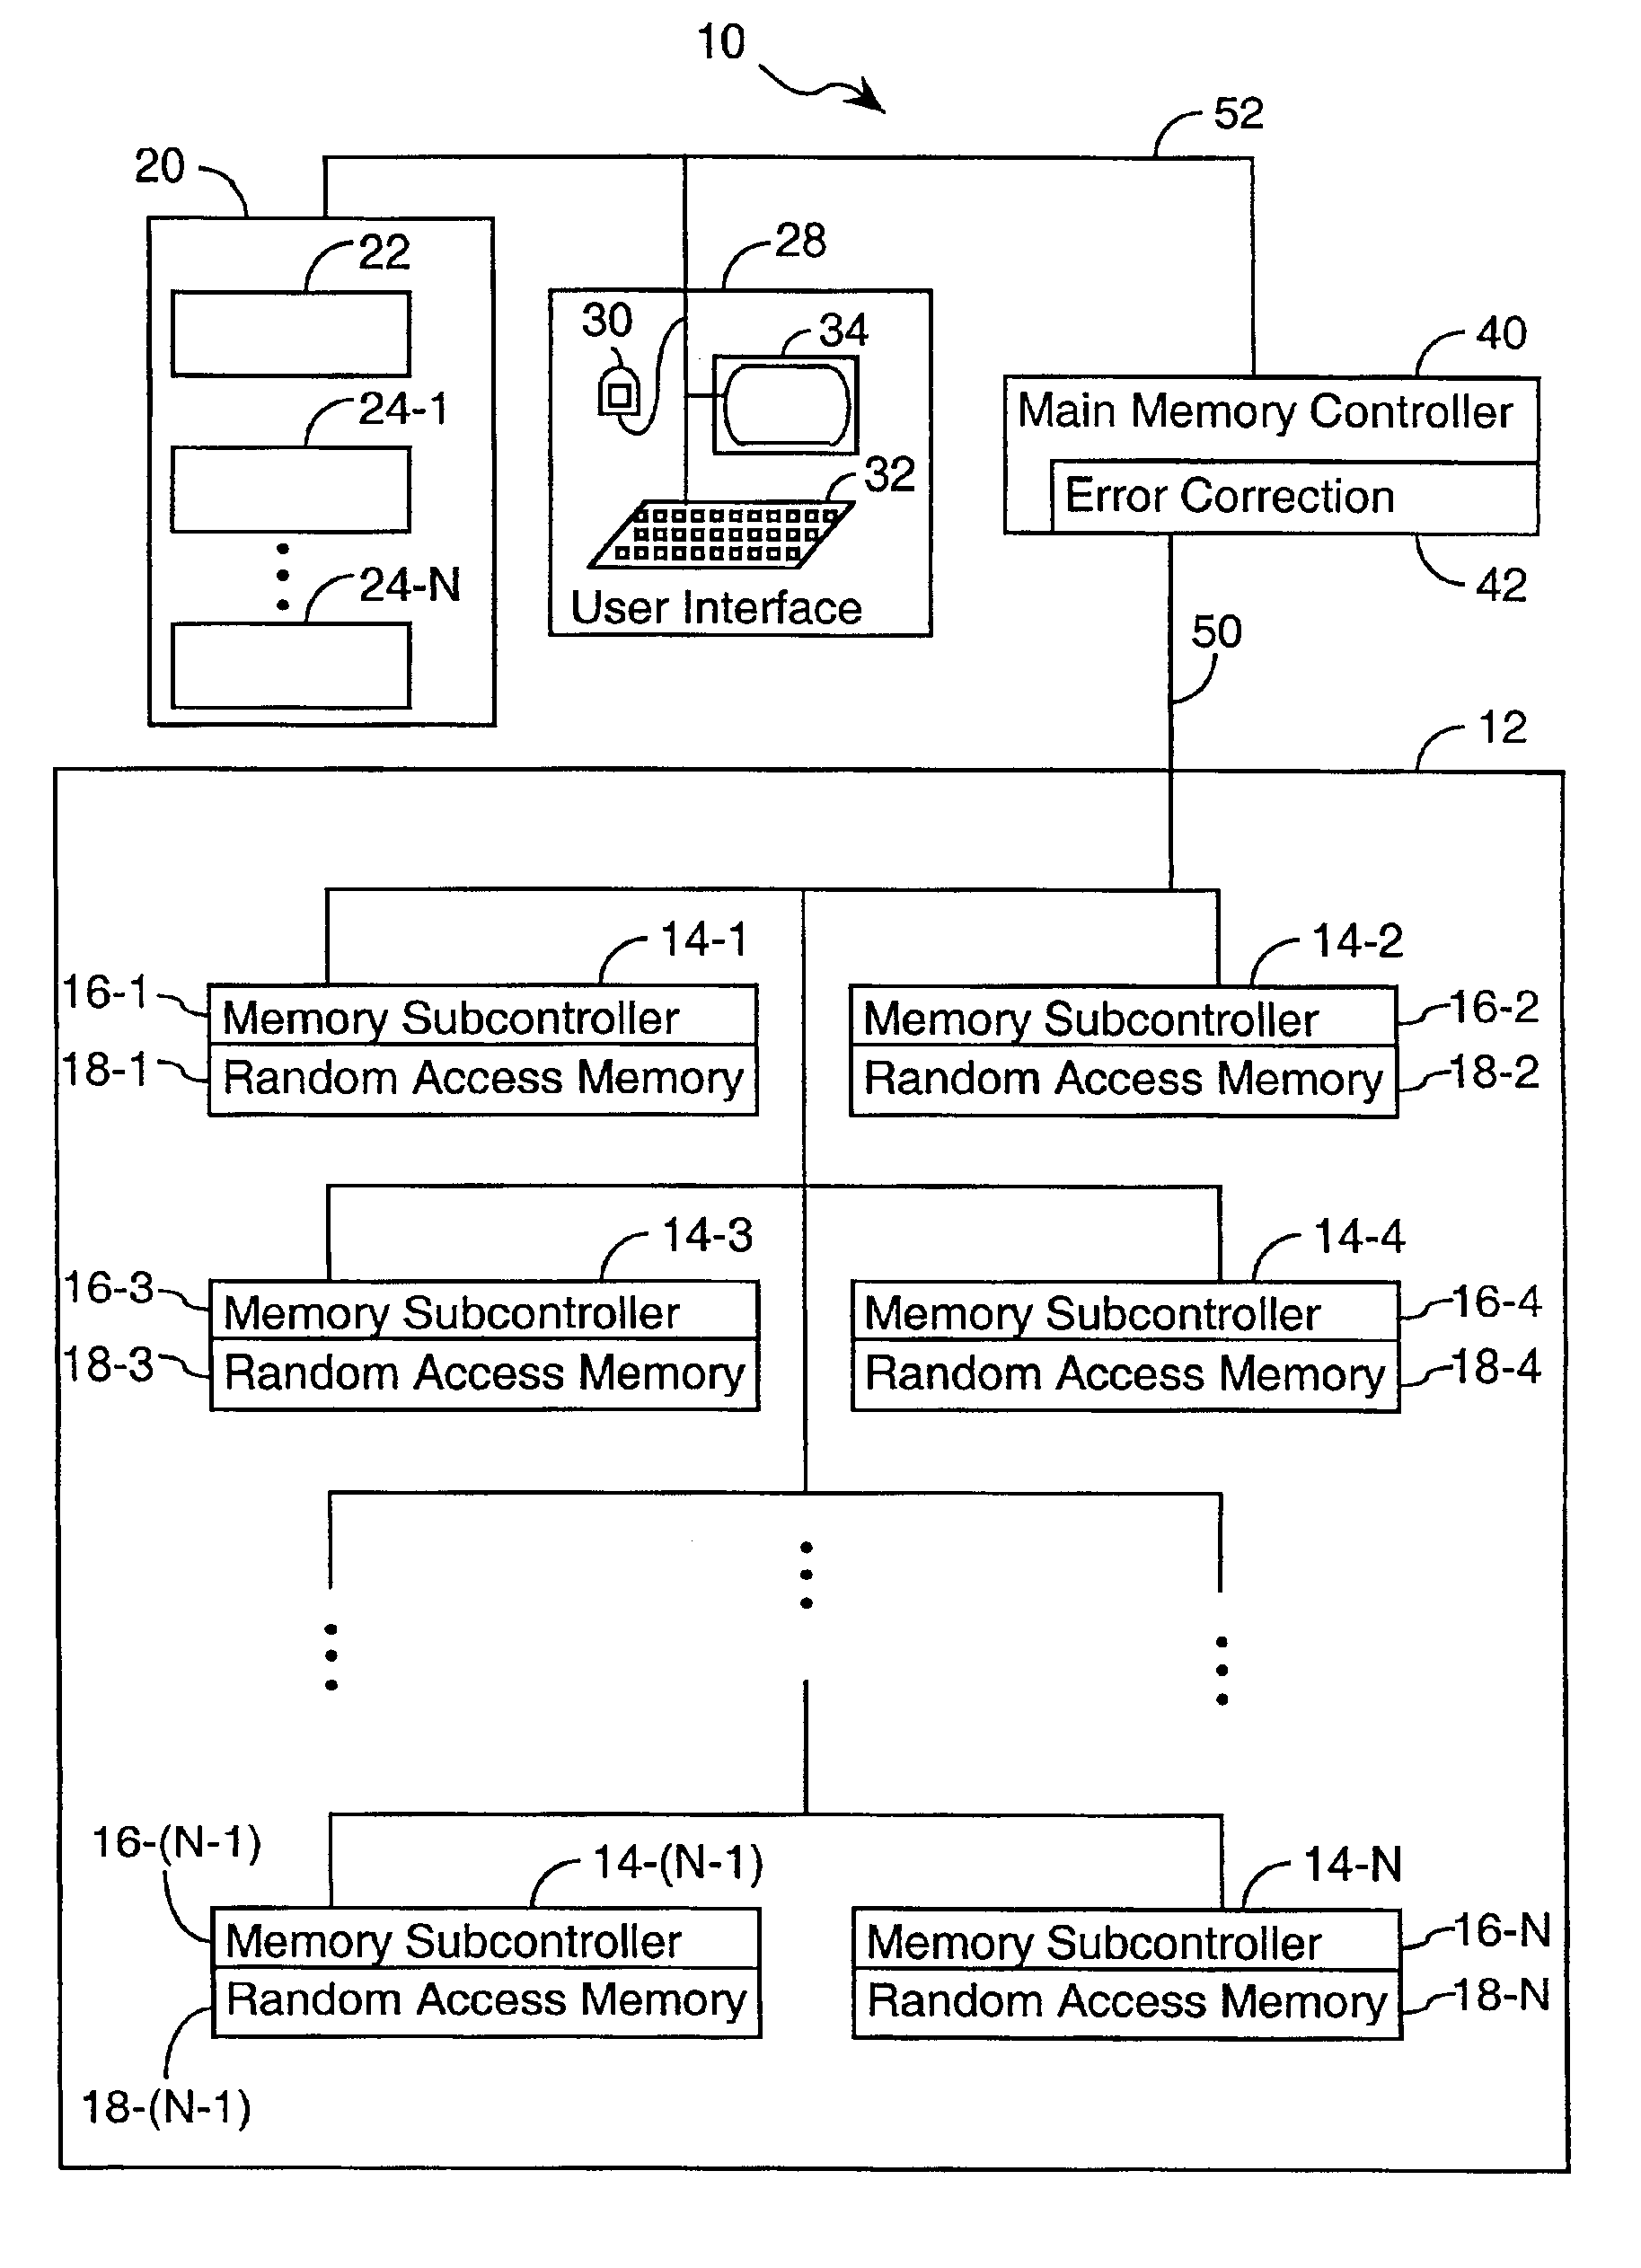 System and method for scrubbing errors in very large memories